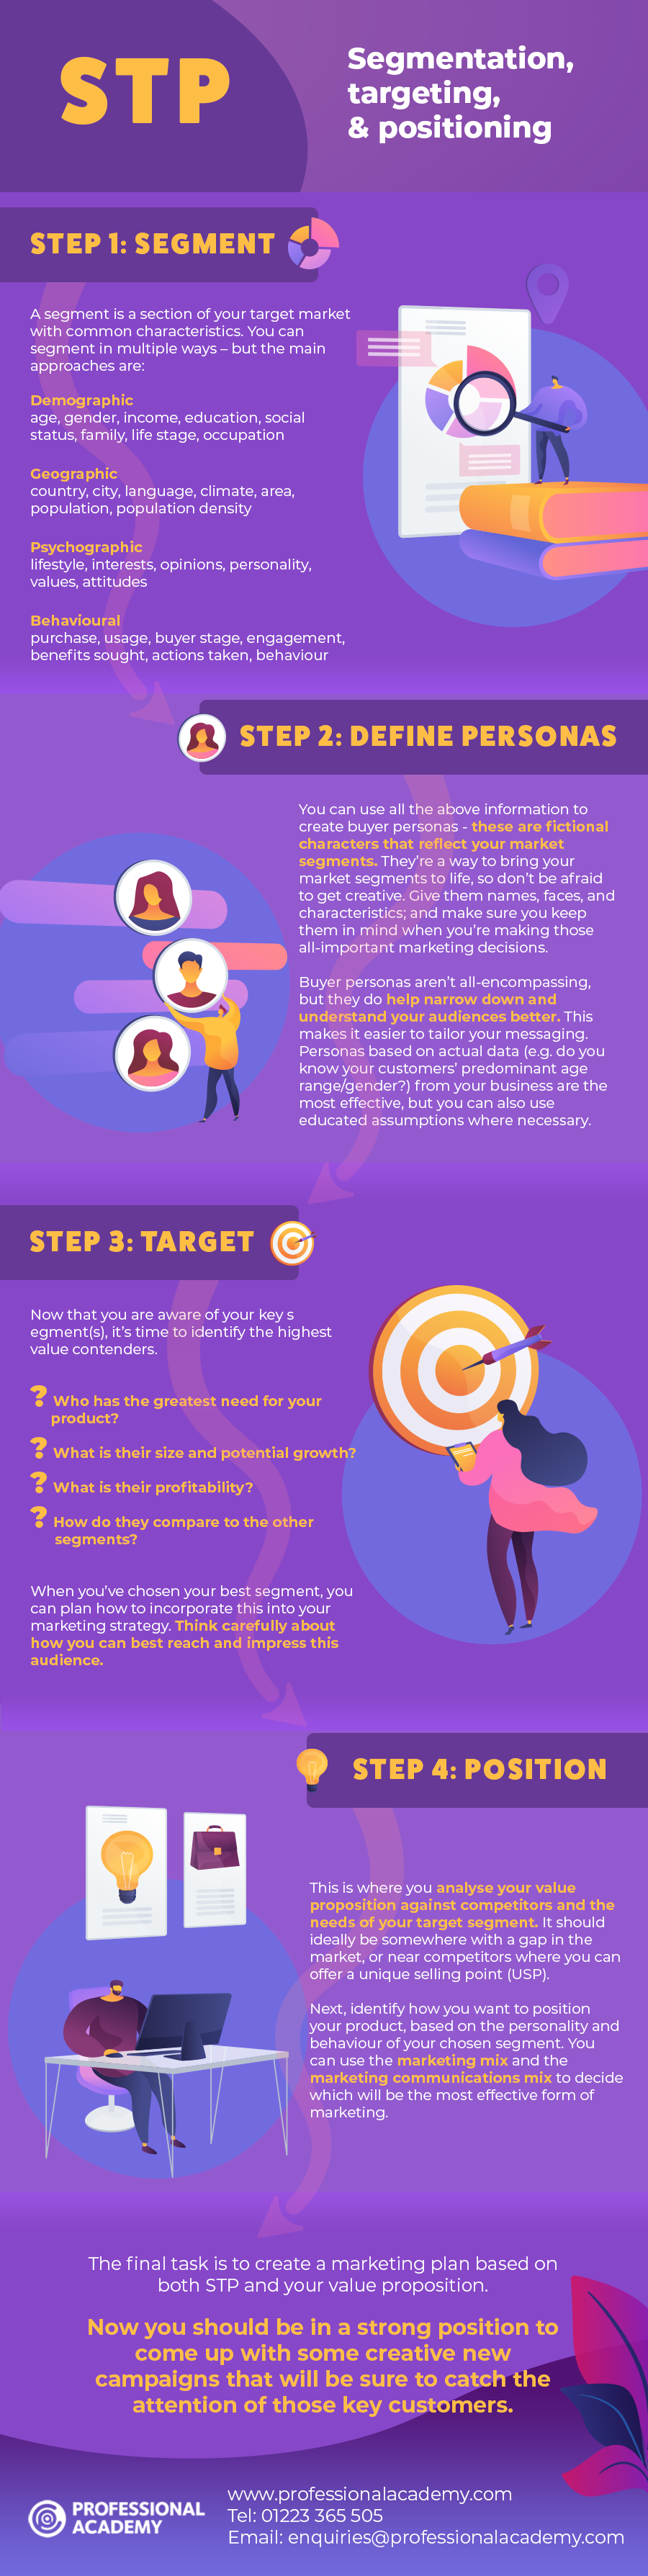 Segmentation, targeting and positioning infographic